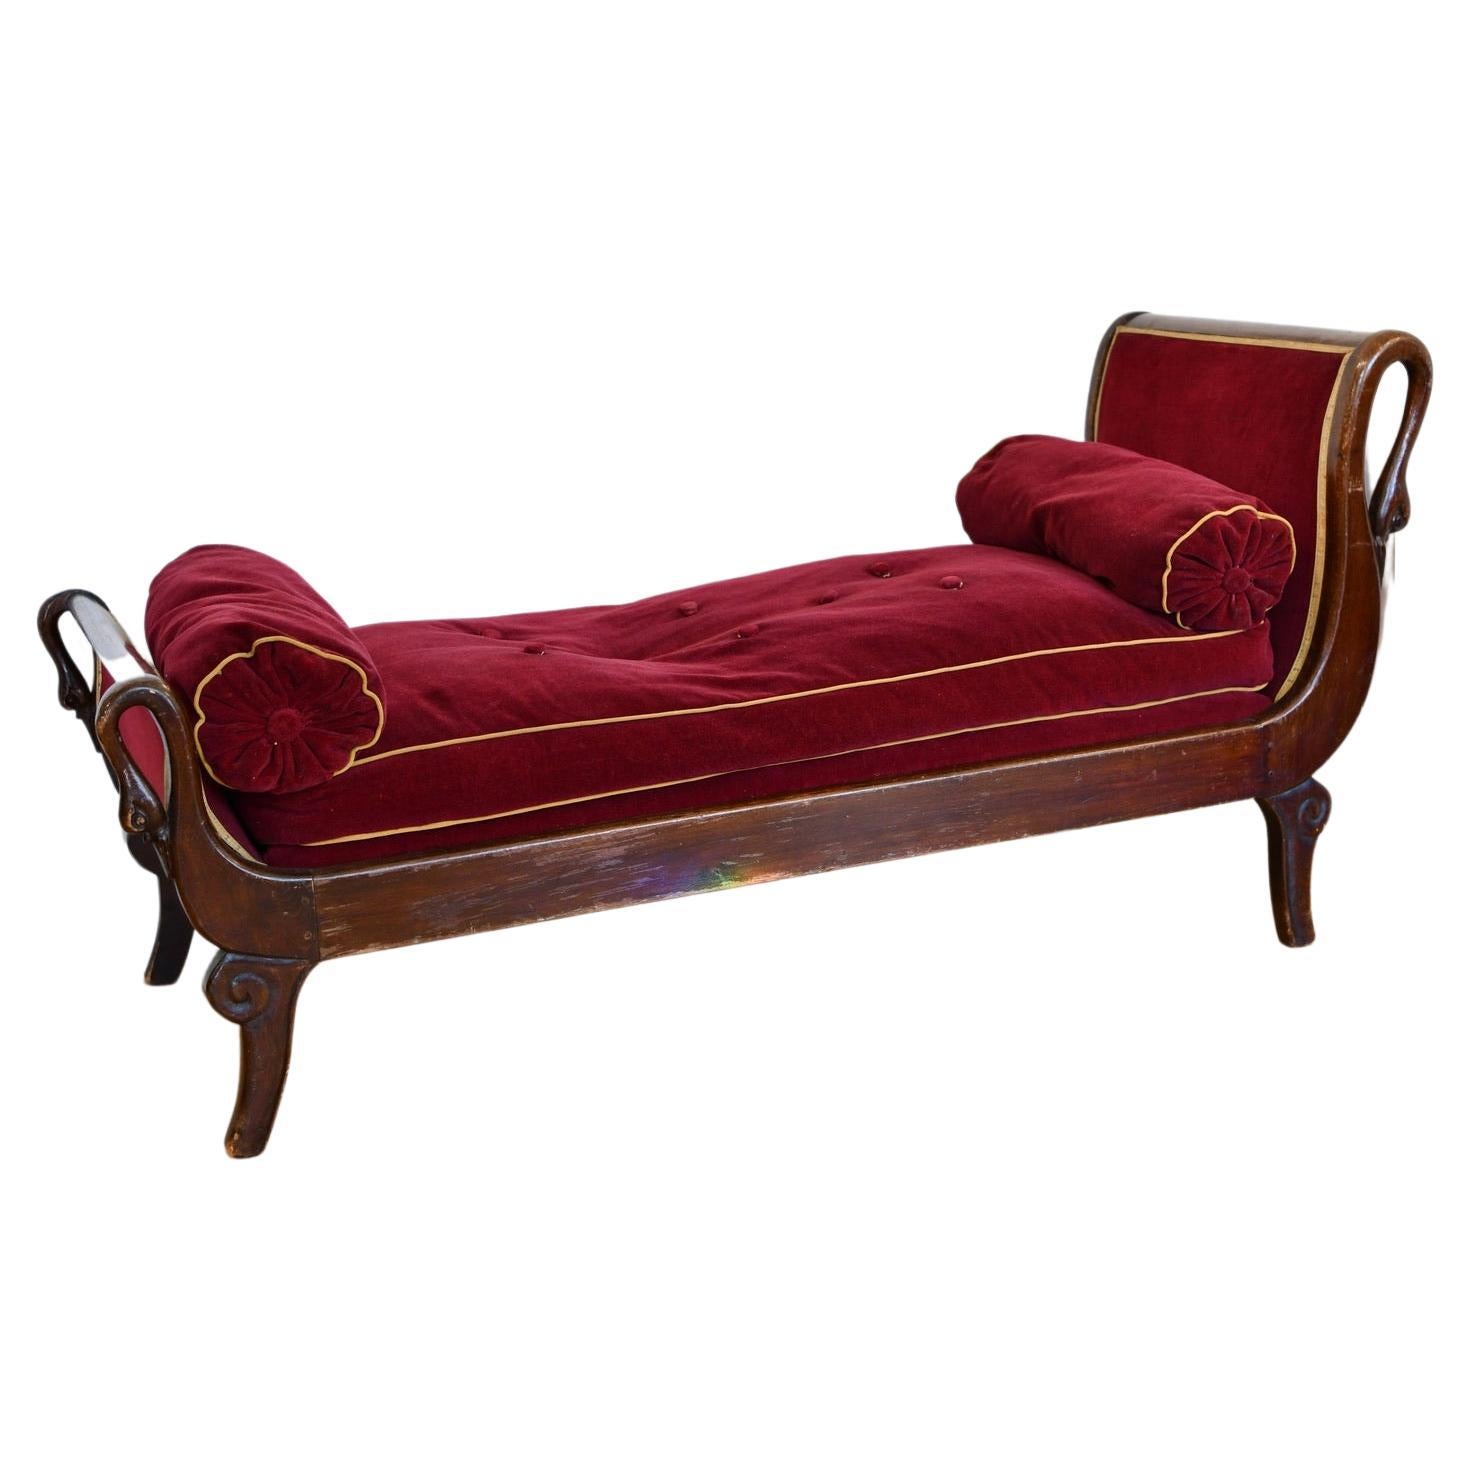 Antique French Mahogany Swan Decorated Chaise Longue For Sale